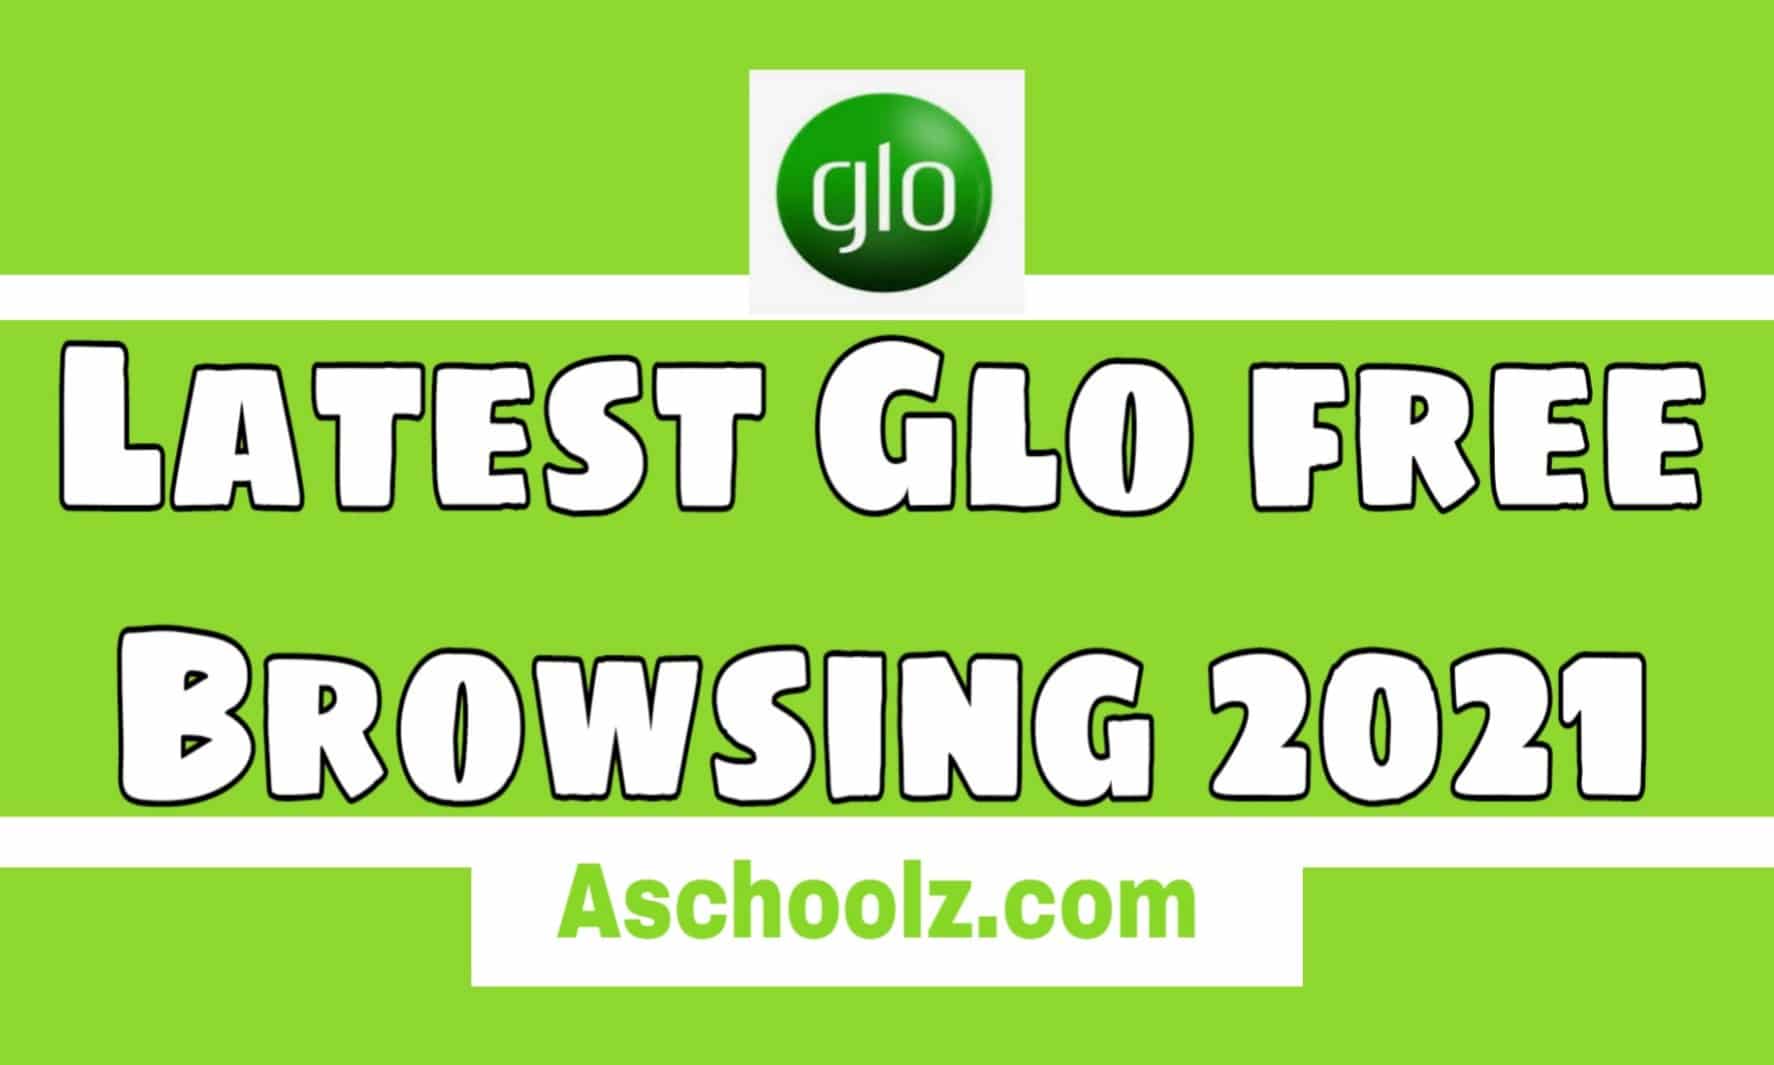 Latest Glo free Browsing 2021